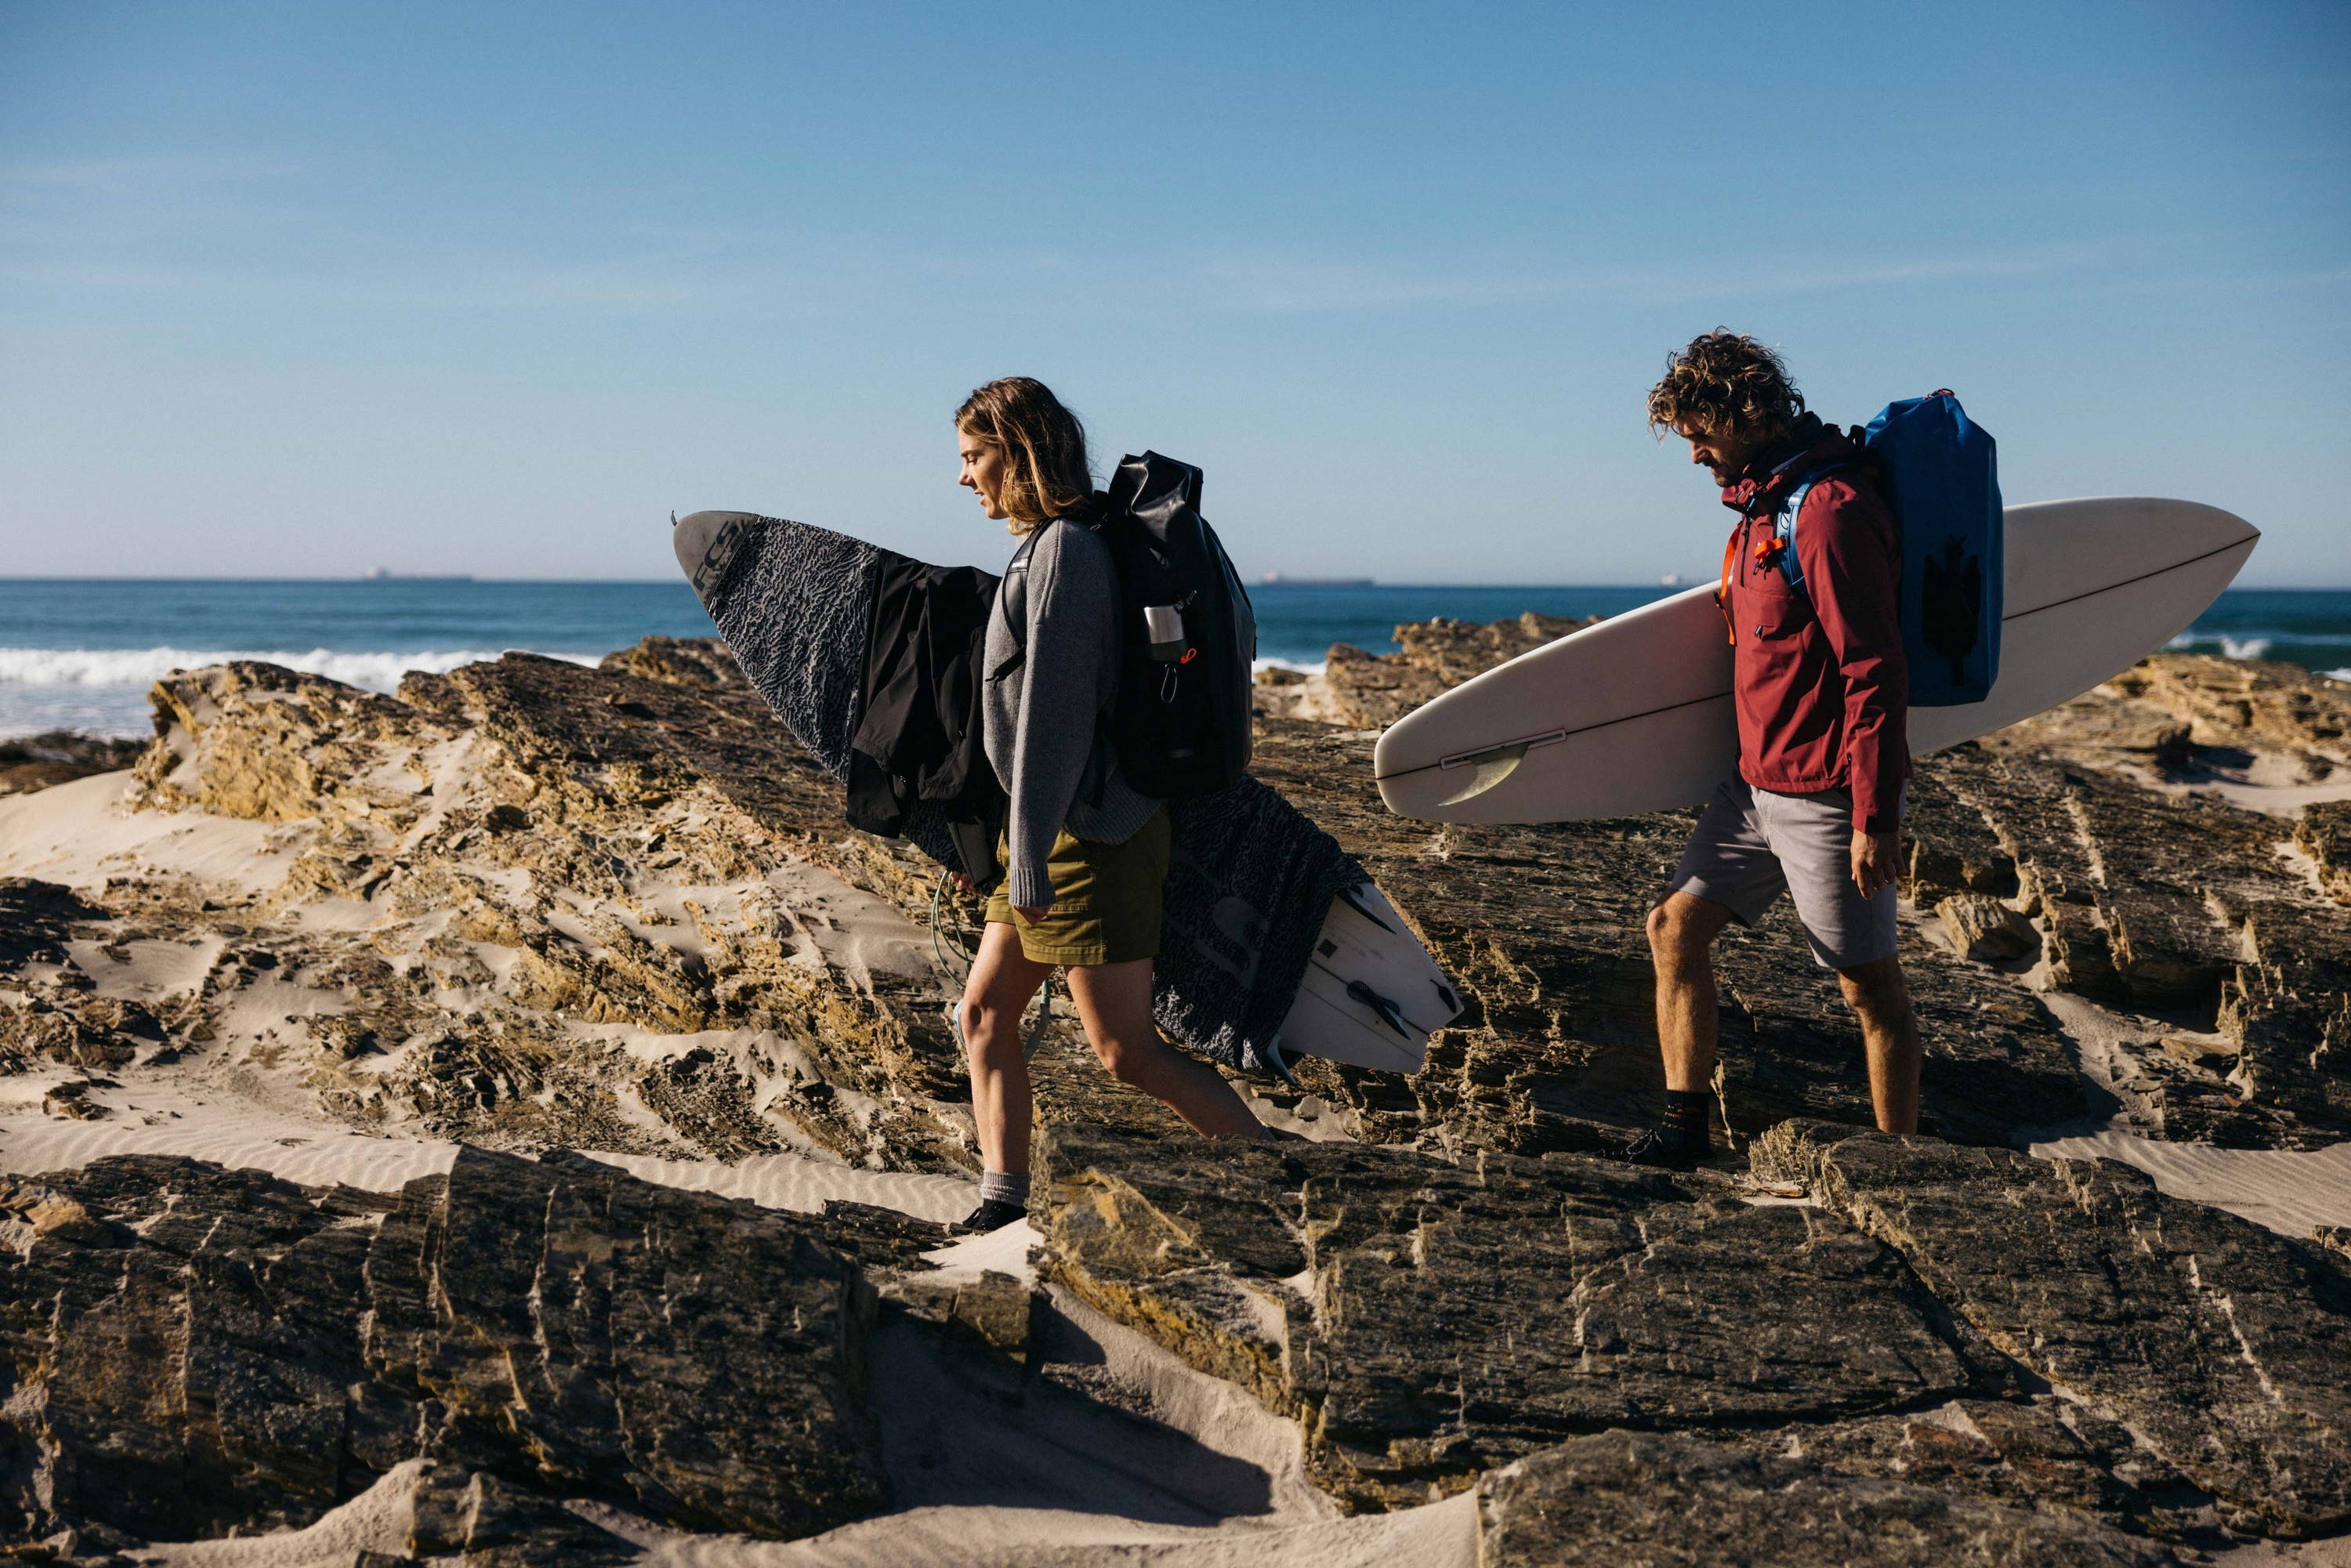 Lucy and Alex carry their surfboards over rocks in Portugal